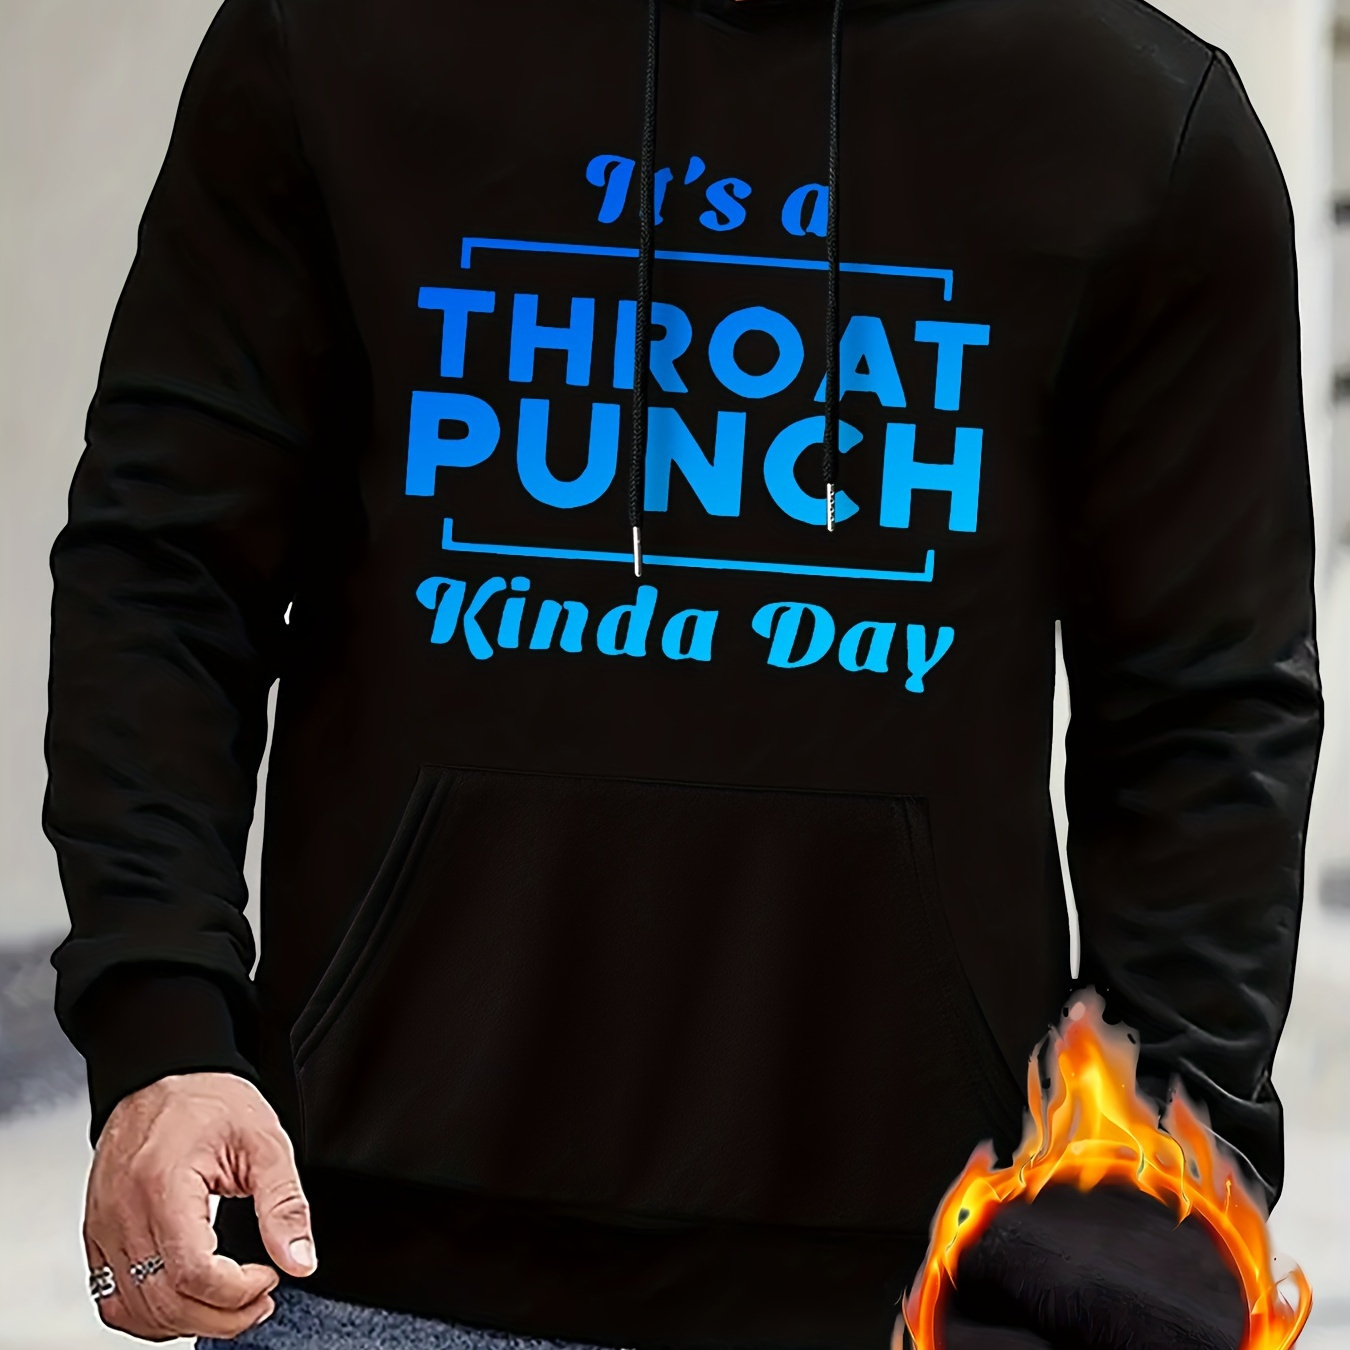 

It's A Throat Punch Kinda Day Print Men's Pullover Round Neck Long Sleeve Sweatshirt Pattern Loose Casual Top For Autumn Winter Men's Clothing As Gifts